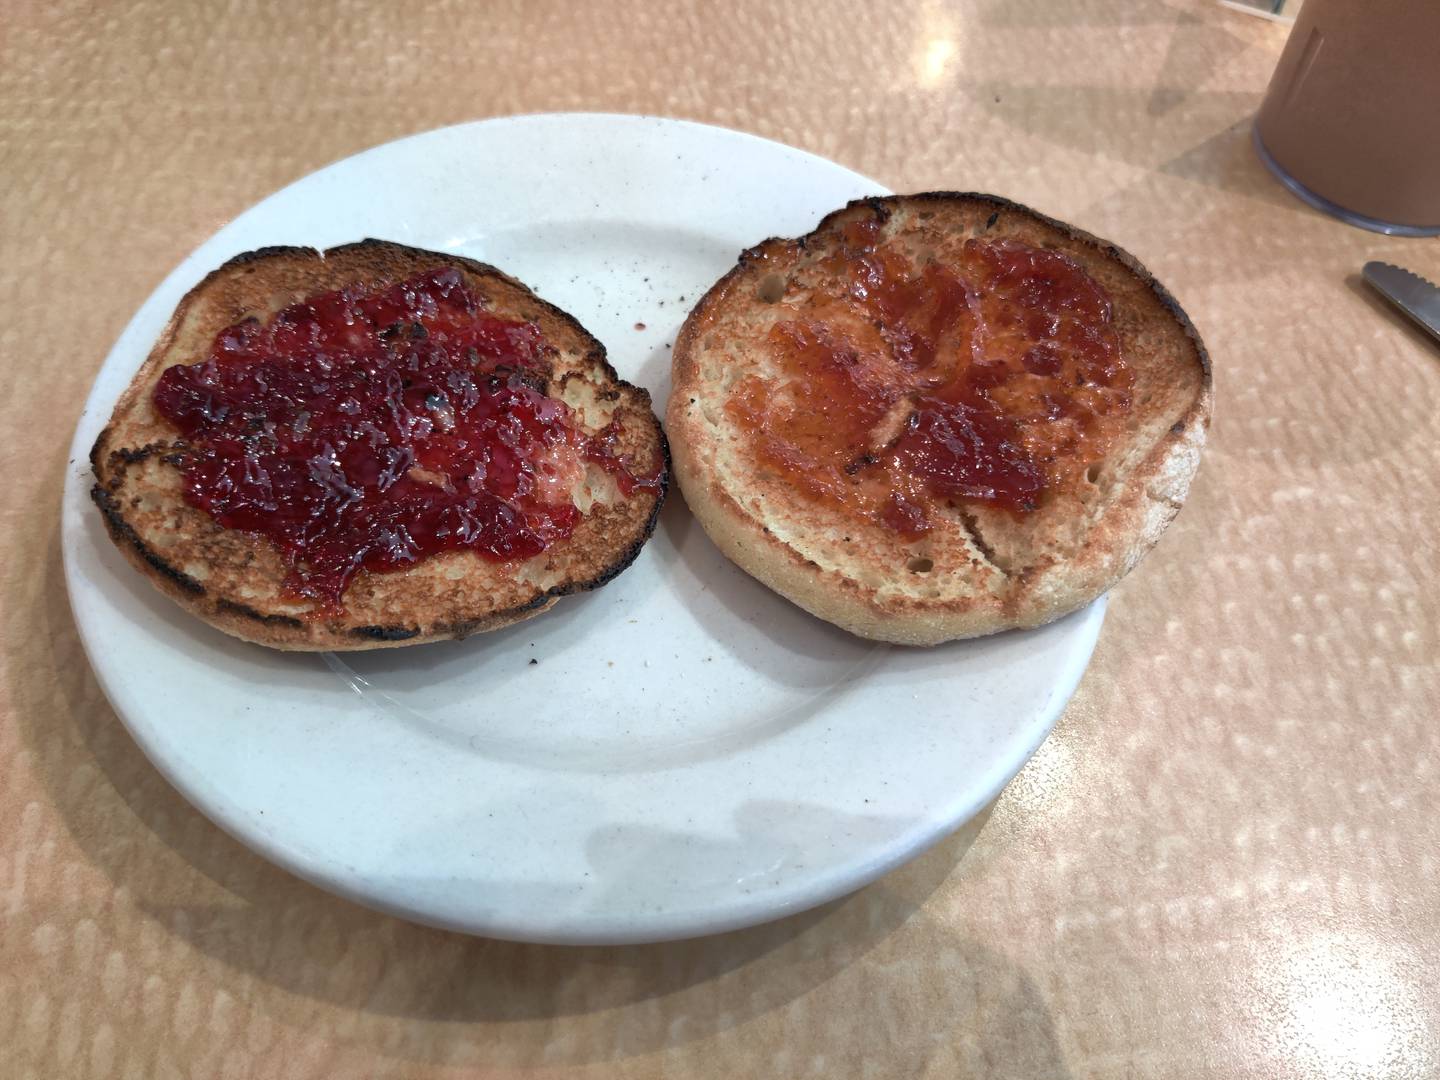 An English muffin with jam at Chicken noodle soup at Randall's Pancake House & Restaurant in South Elgin.